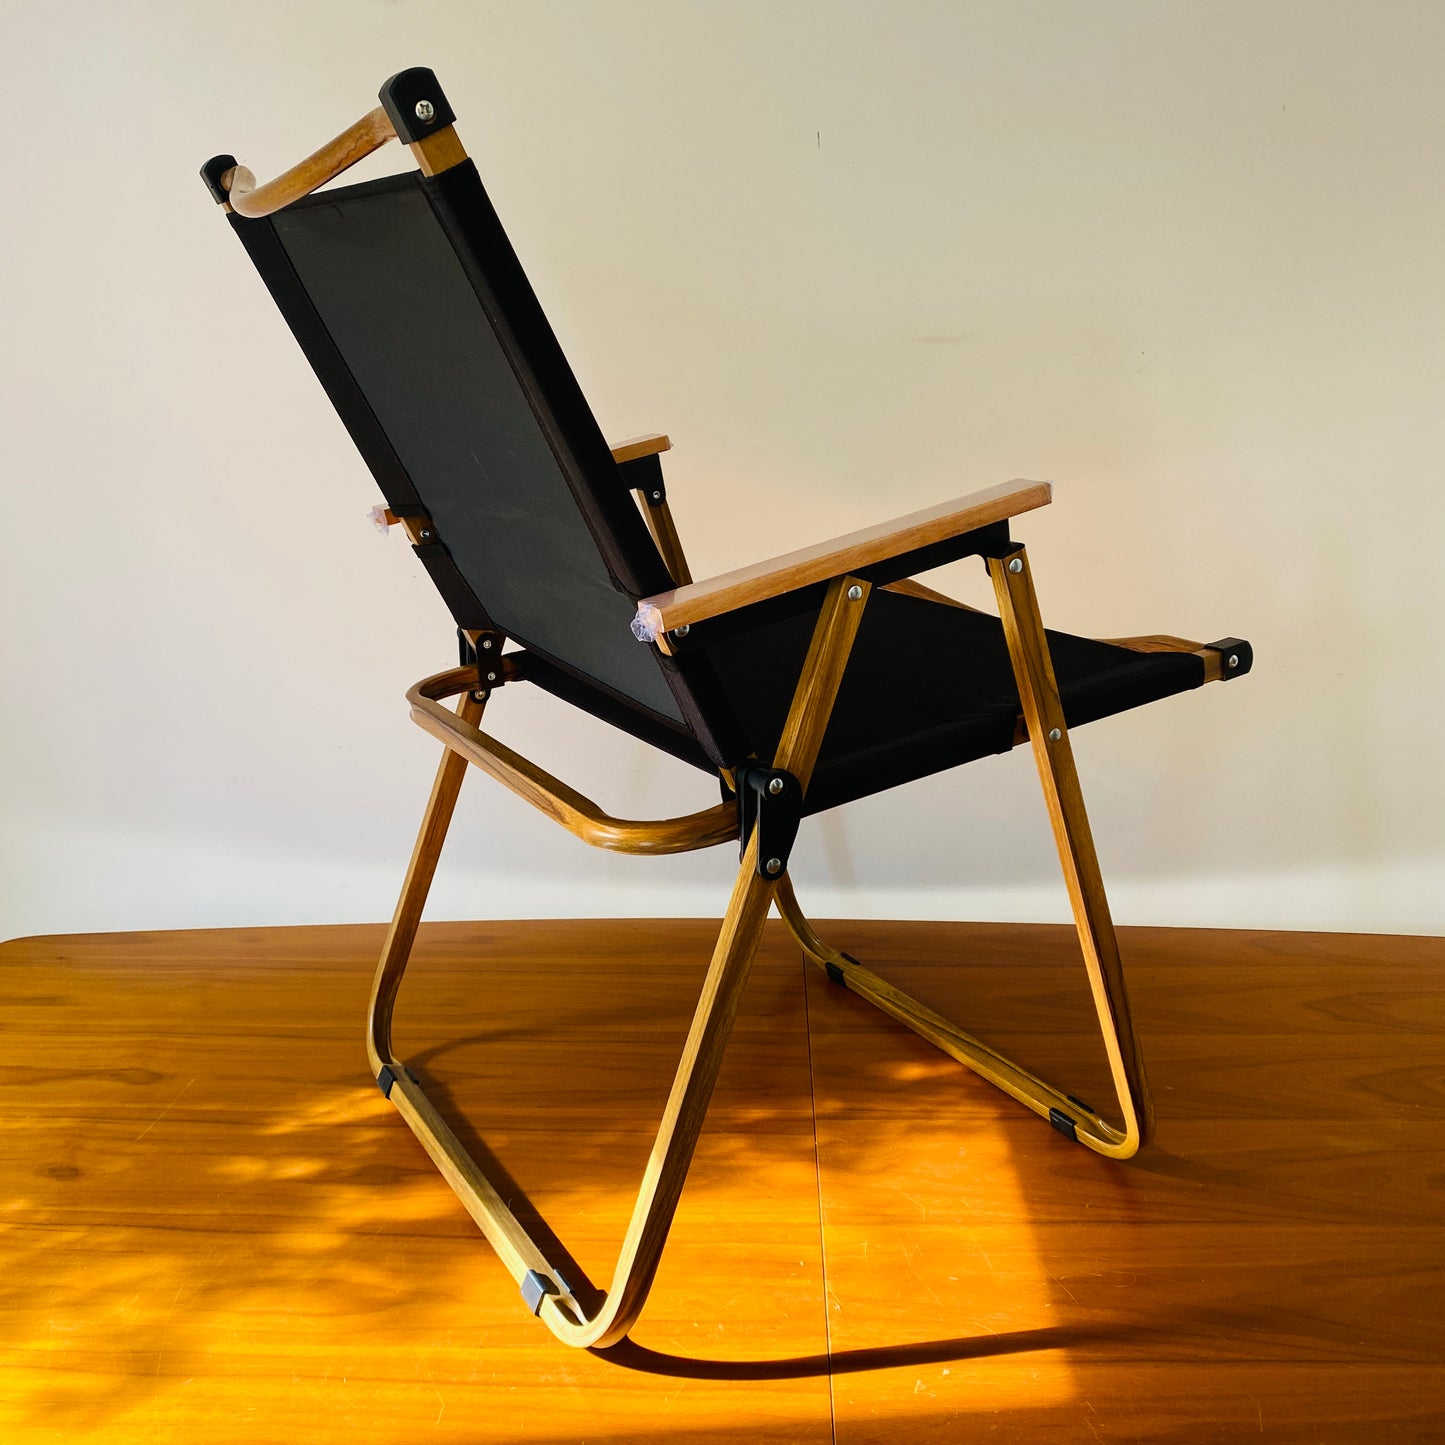 A back view of the foldable, portable, luxury safari chair in black by The Well Heeled Hippy